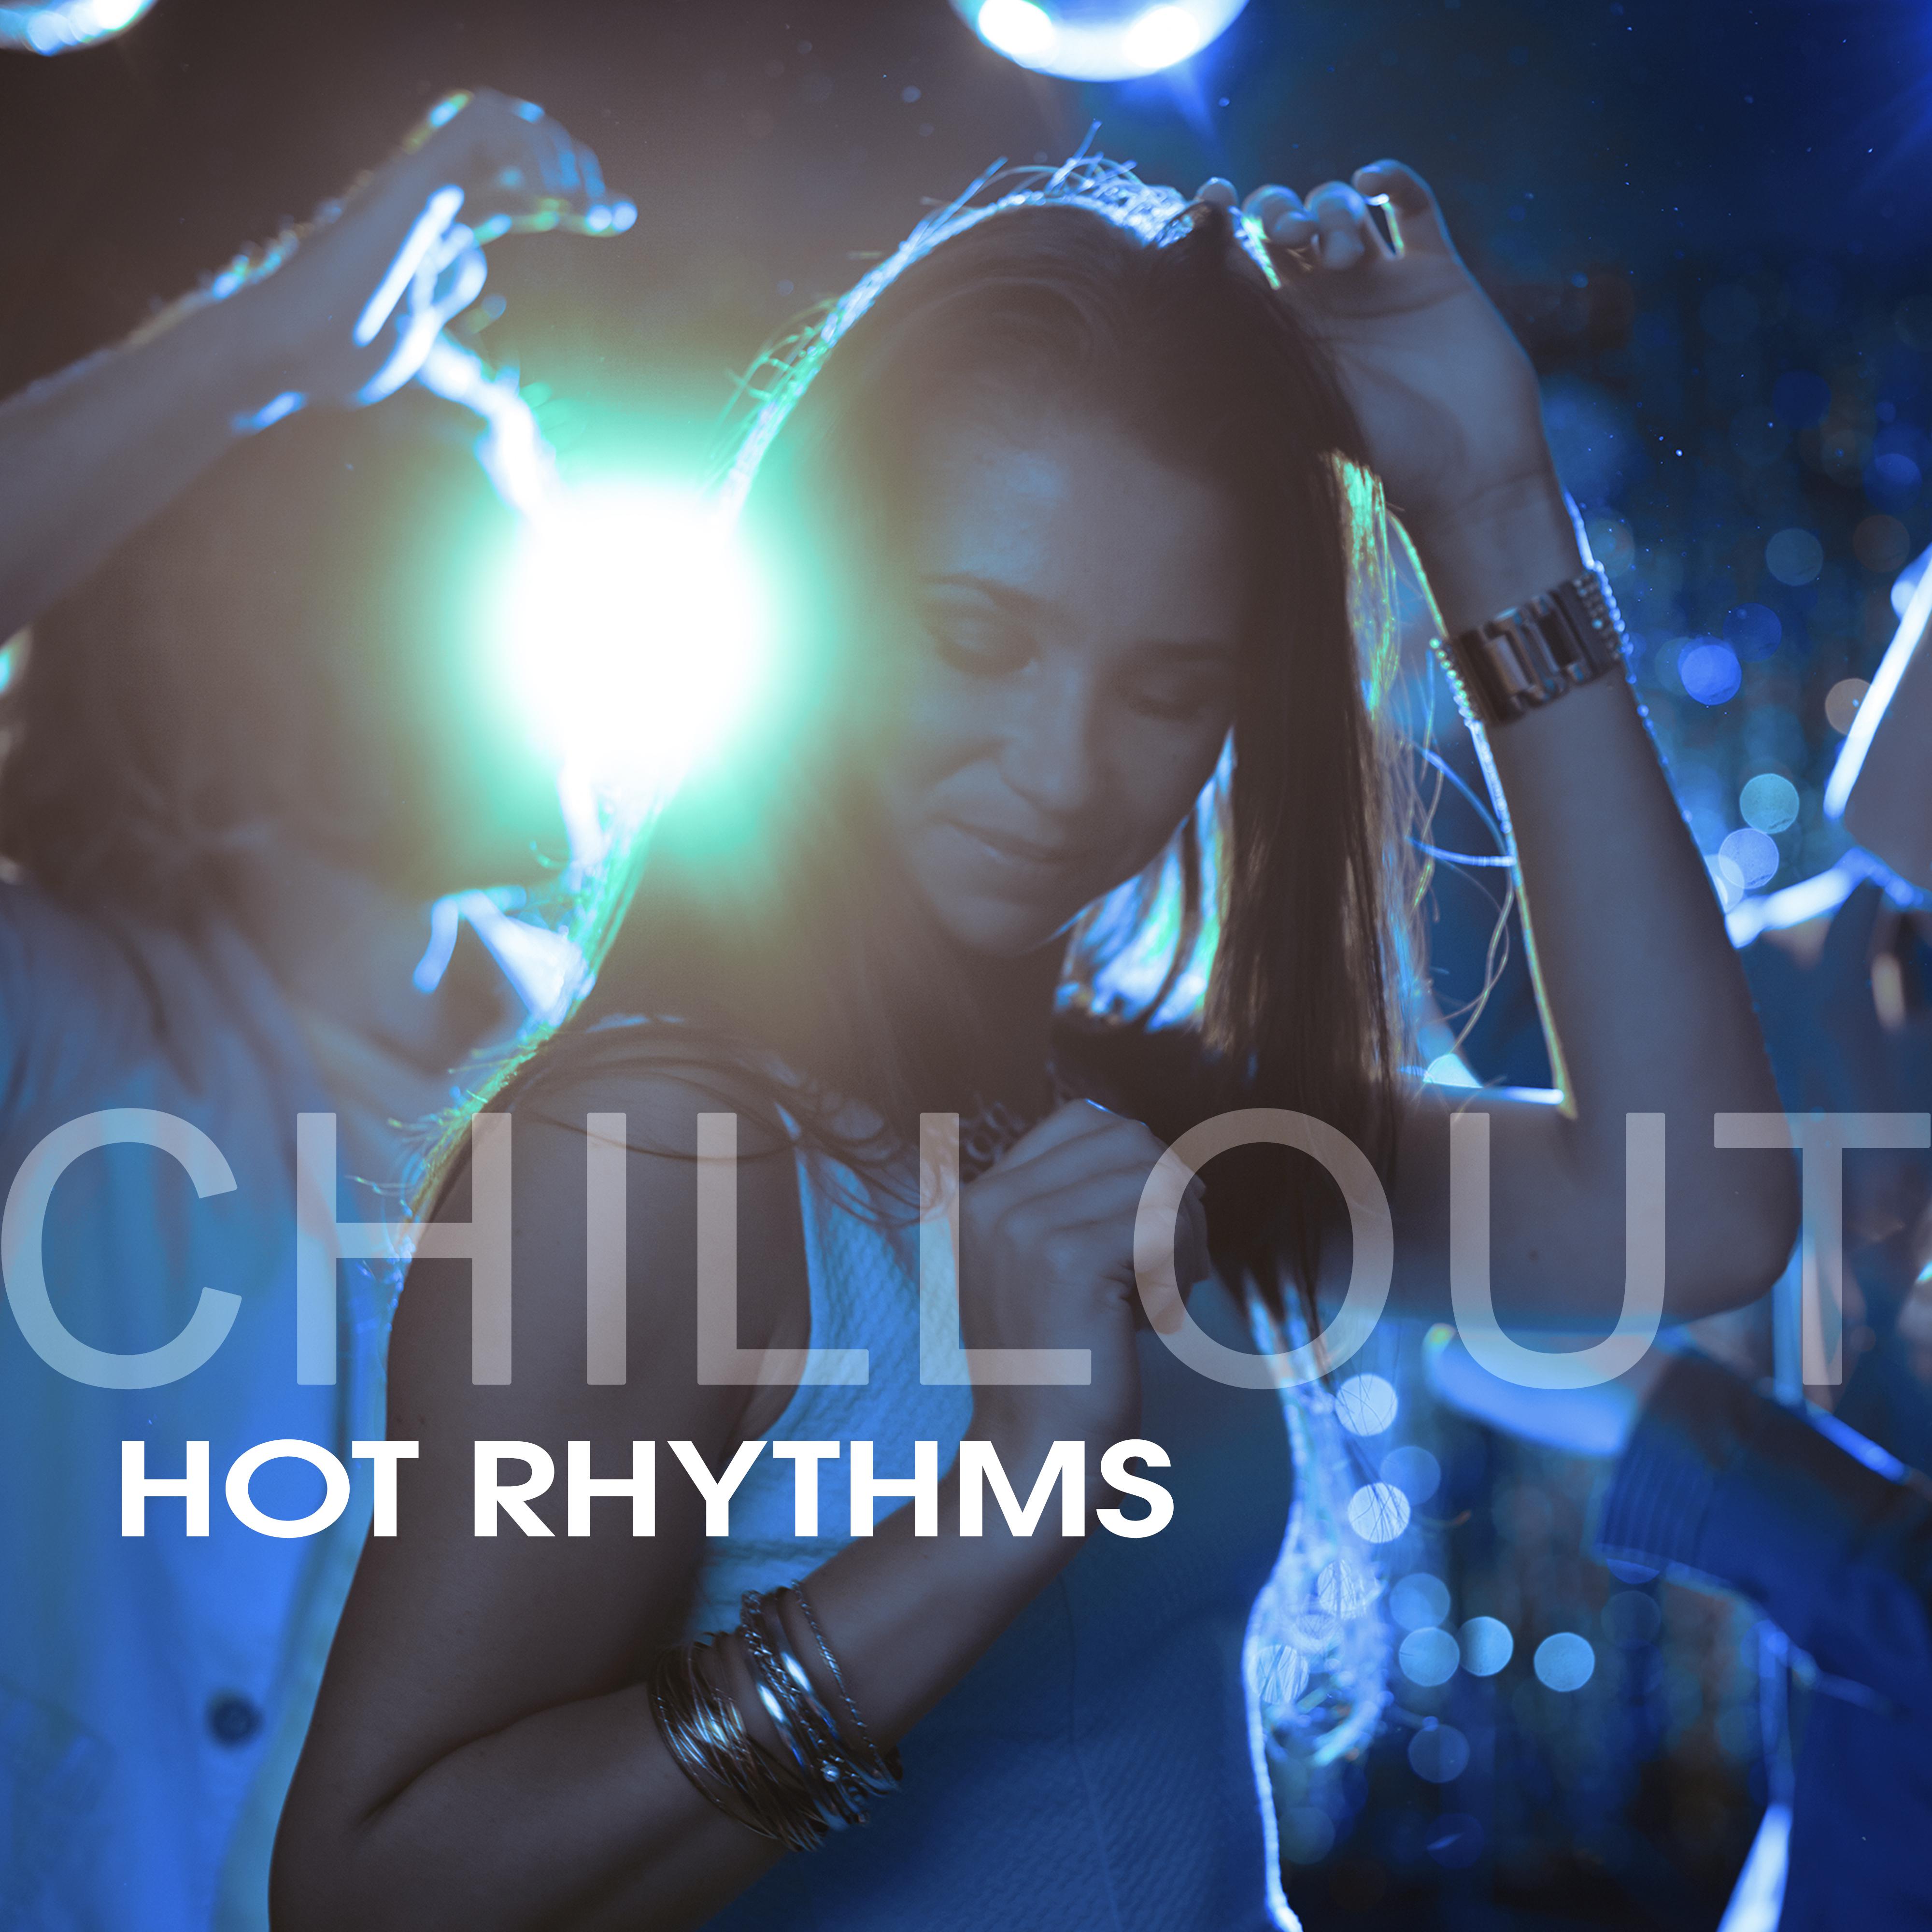 Chillout Hot Rhythms – Beach Music, Summertime, Party, Dance, Chill Out Music, Ibiza, Summer 2017